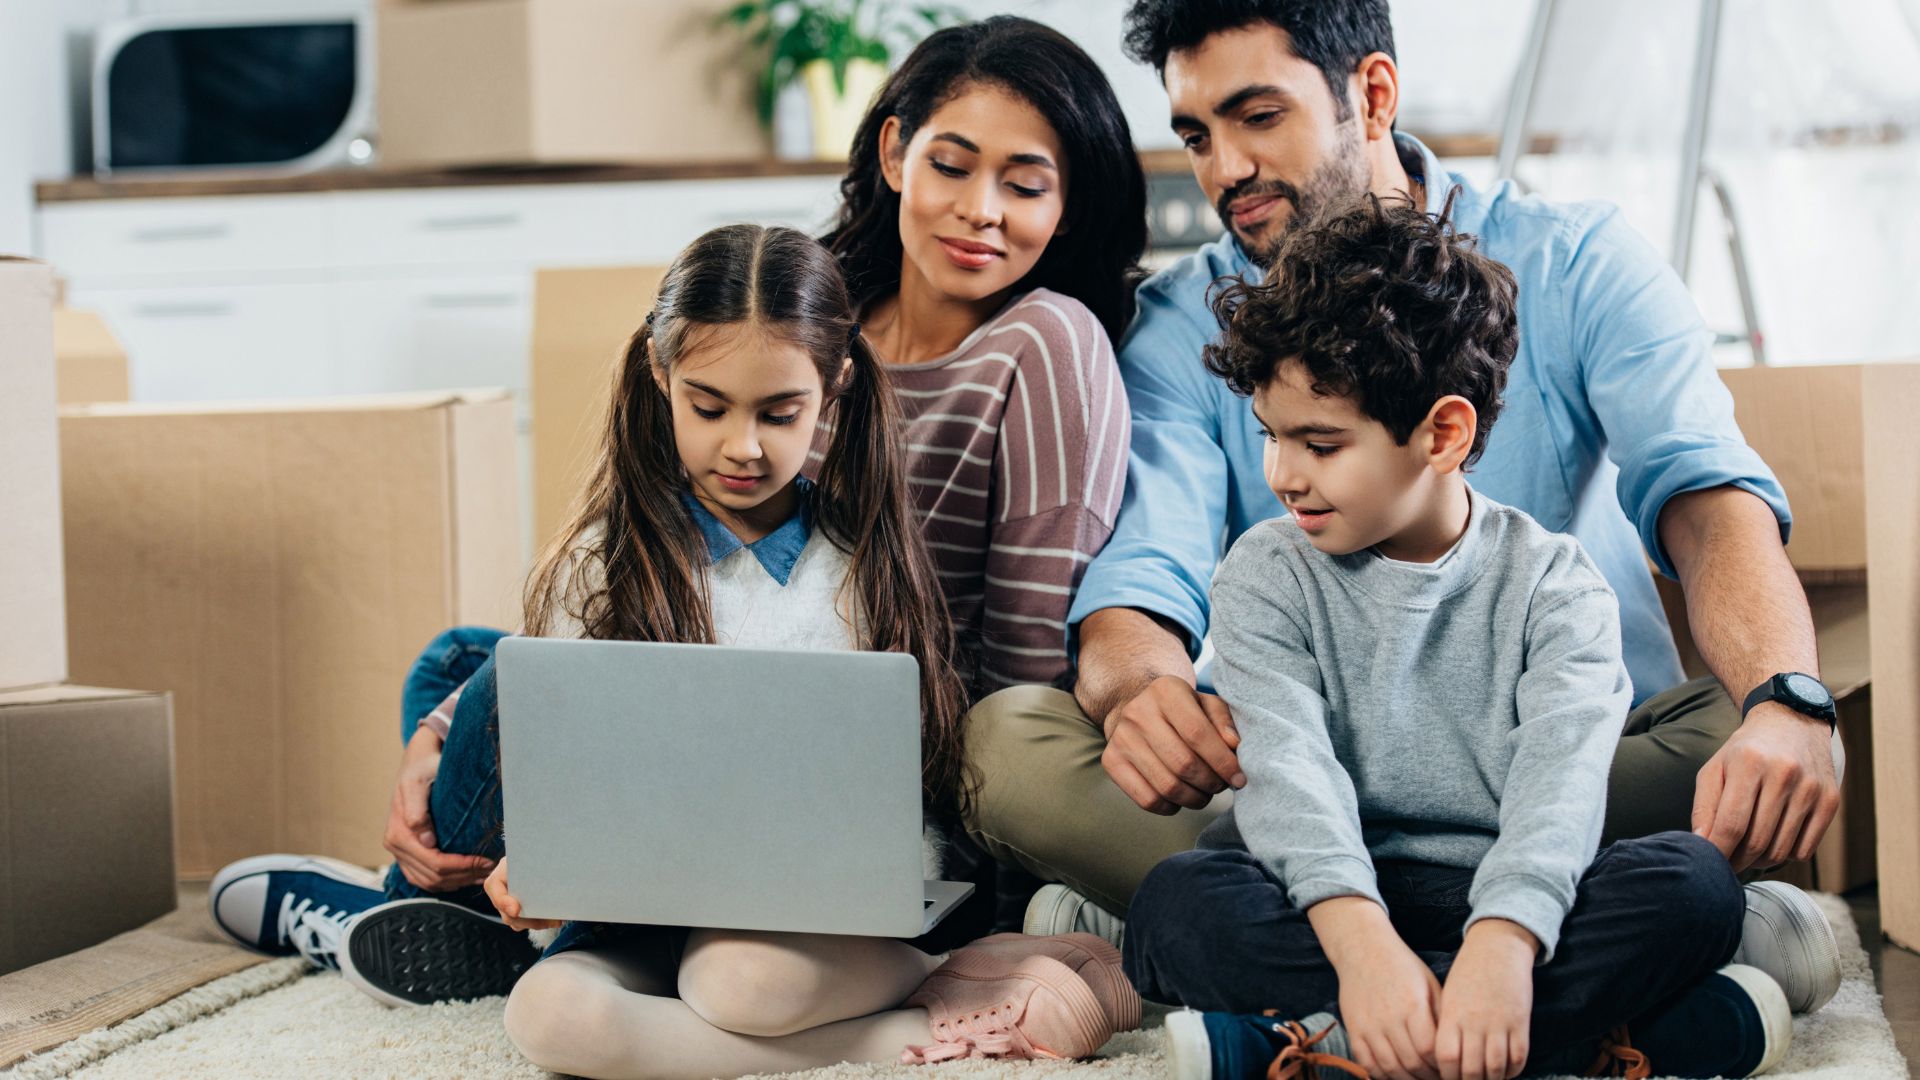 A family photo consisting of father, mother, daughter, and son gathered in the living room while looking at the laptop as targeted content marketing.